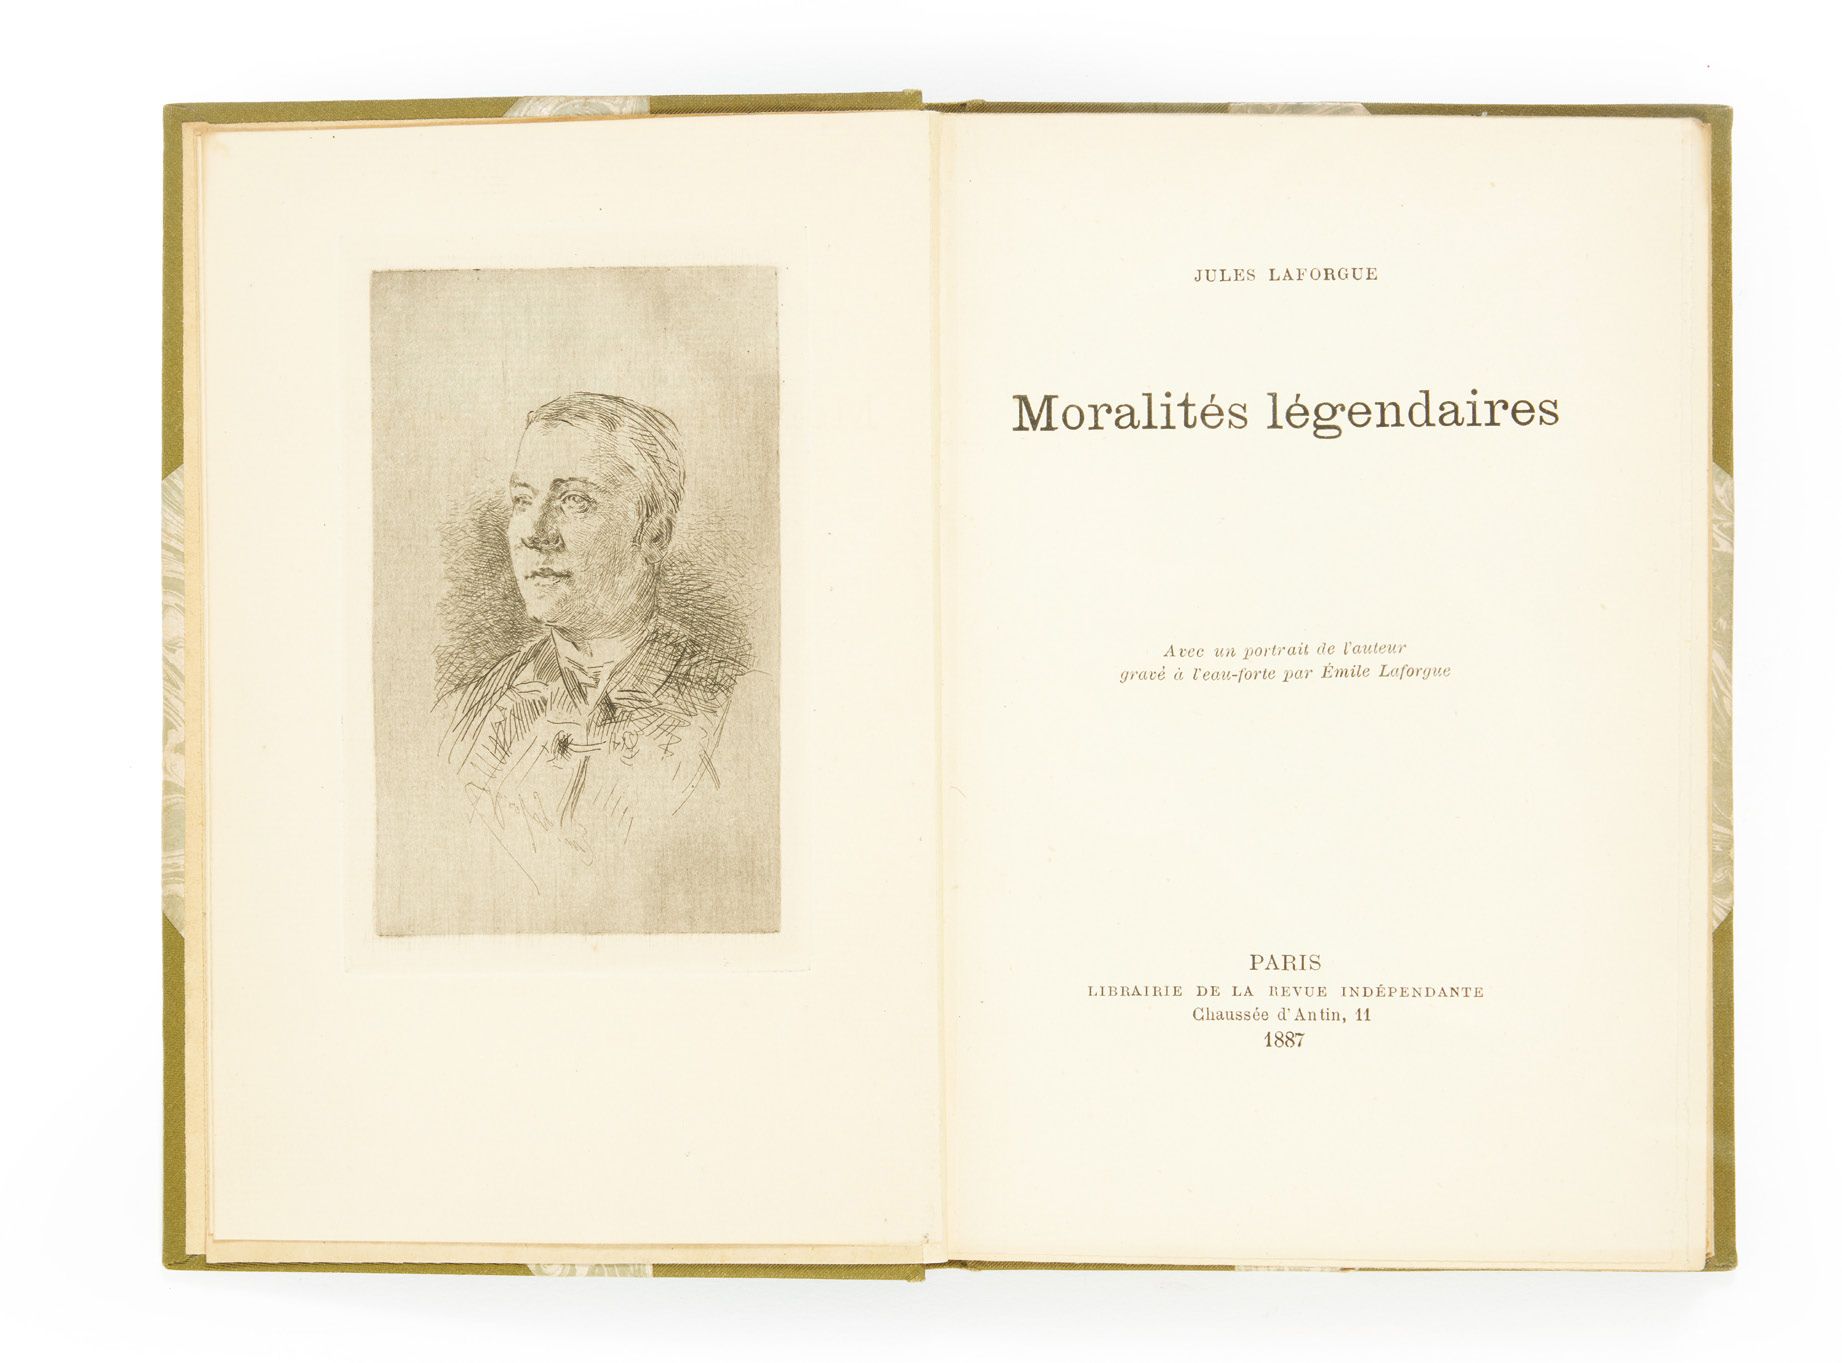 LAFORGUE, Jules. Legendary moralities. With an etched portrait of the author by &hellip;